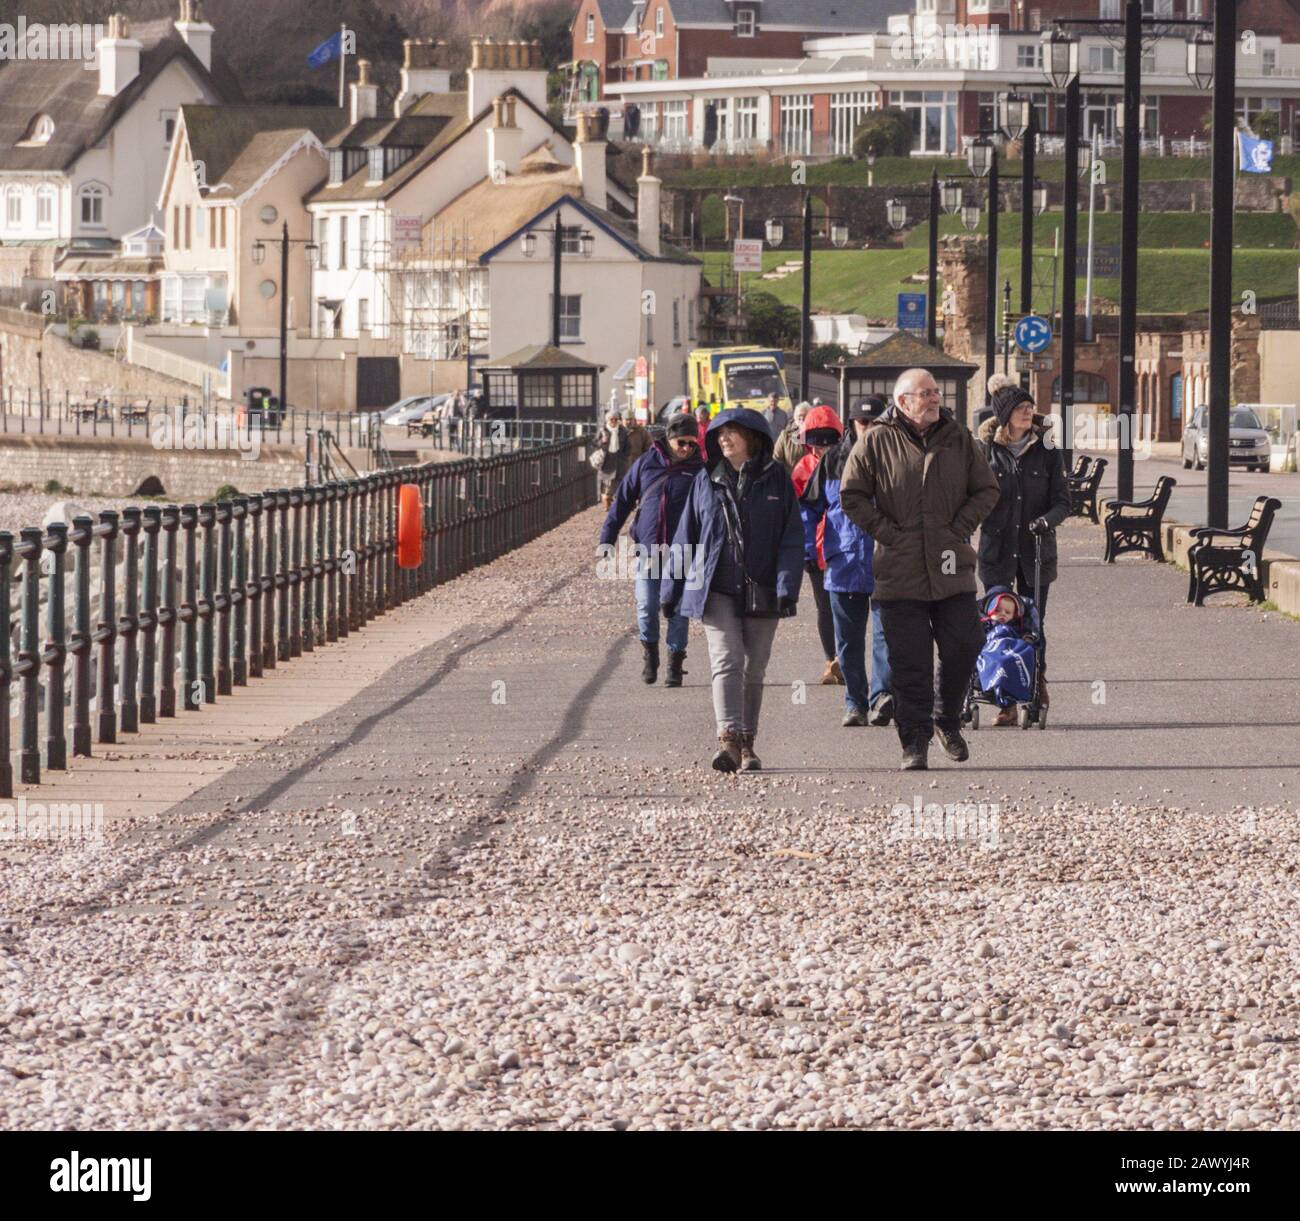 Sidmouth, Devon. 10th Feb 2020. UK Weather: Glass sea defence panels installed on test on the sea wall at Sidmouth, Devon, withstood the full battering of storm Ciara, which pounded the seafront, and the panels, with shale and rock. Credit: Photo Central/Alamy Live News Stock Photo